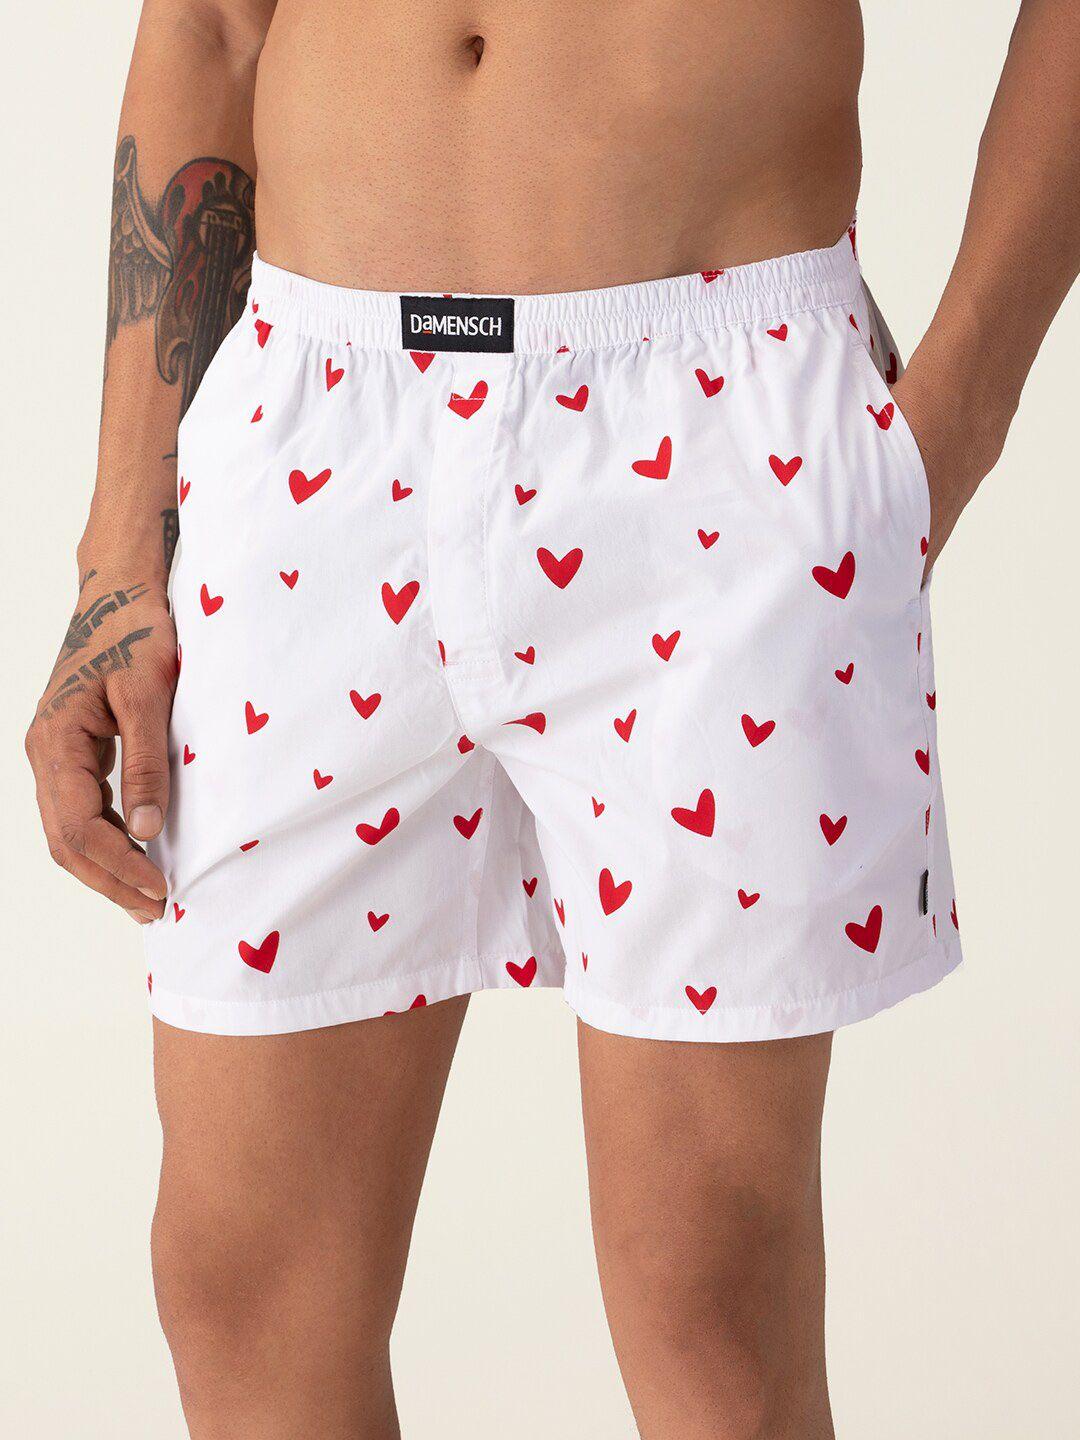 damensch-breeeze-men-white-&-red-printed-pure-cotton-ultra-light-boxers